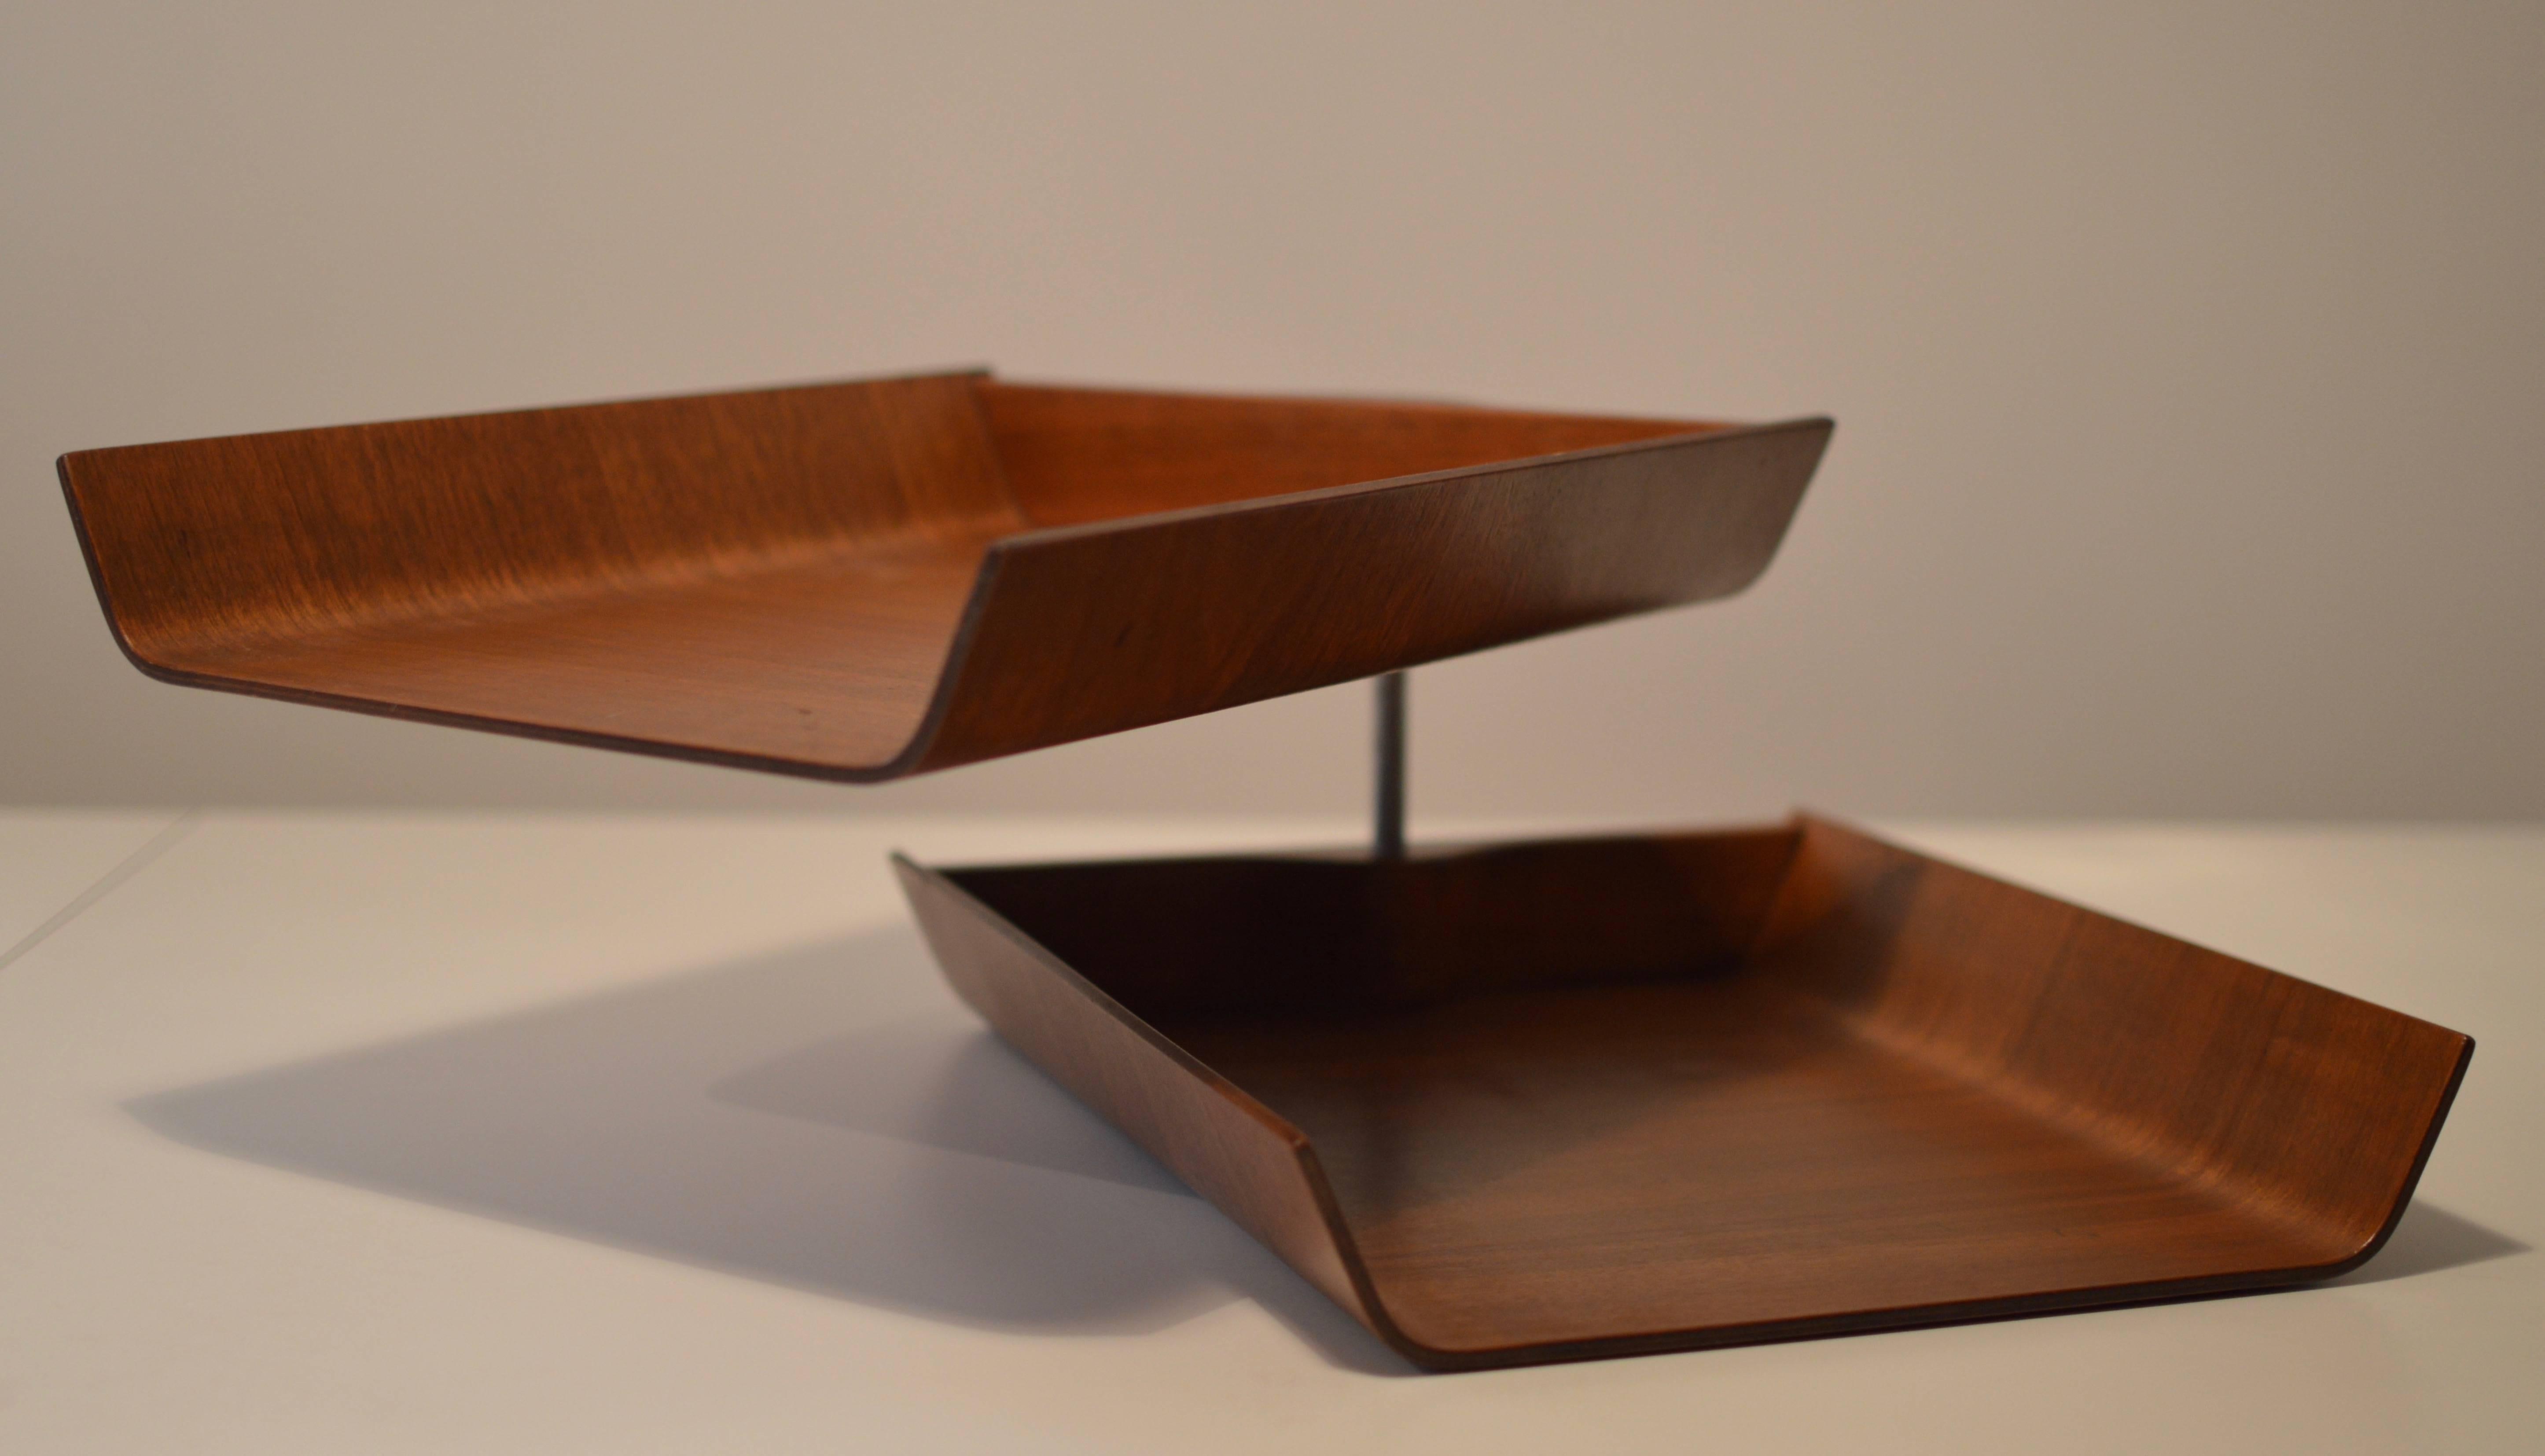 Iconic sculptural and functional desk accessory by Florence Knoll executed in walnut plywood. The upper tray pivots.
Signed with manufacturer's label to underside.

Worldwide standard parcel shipping is complimentary.
 